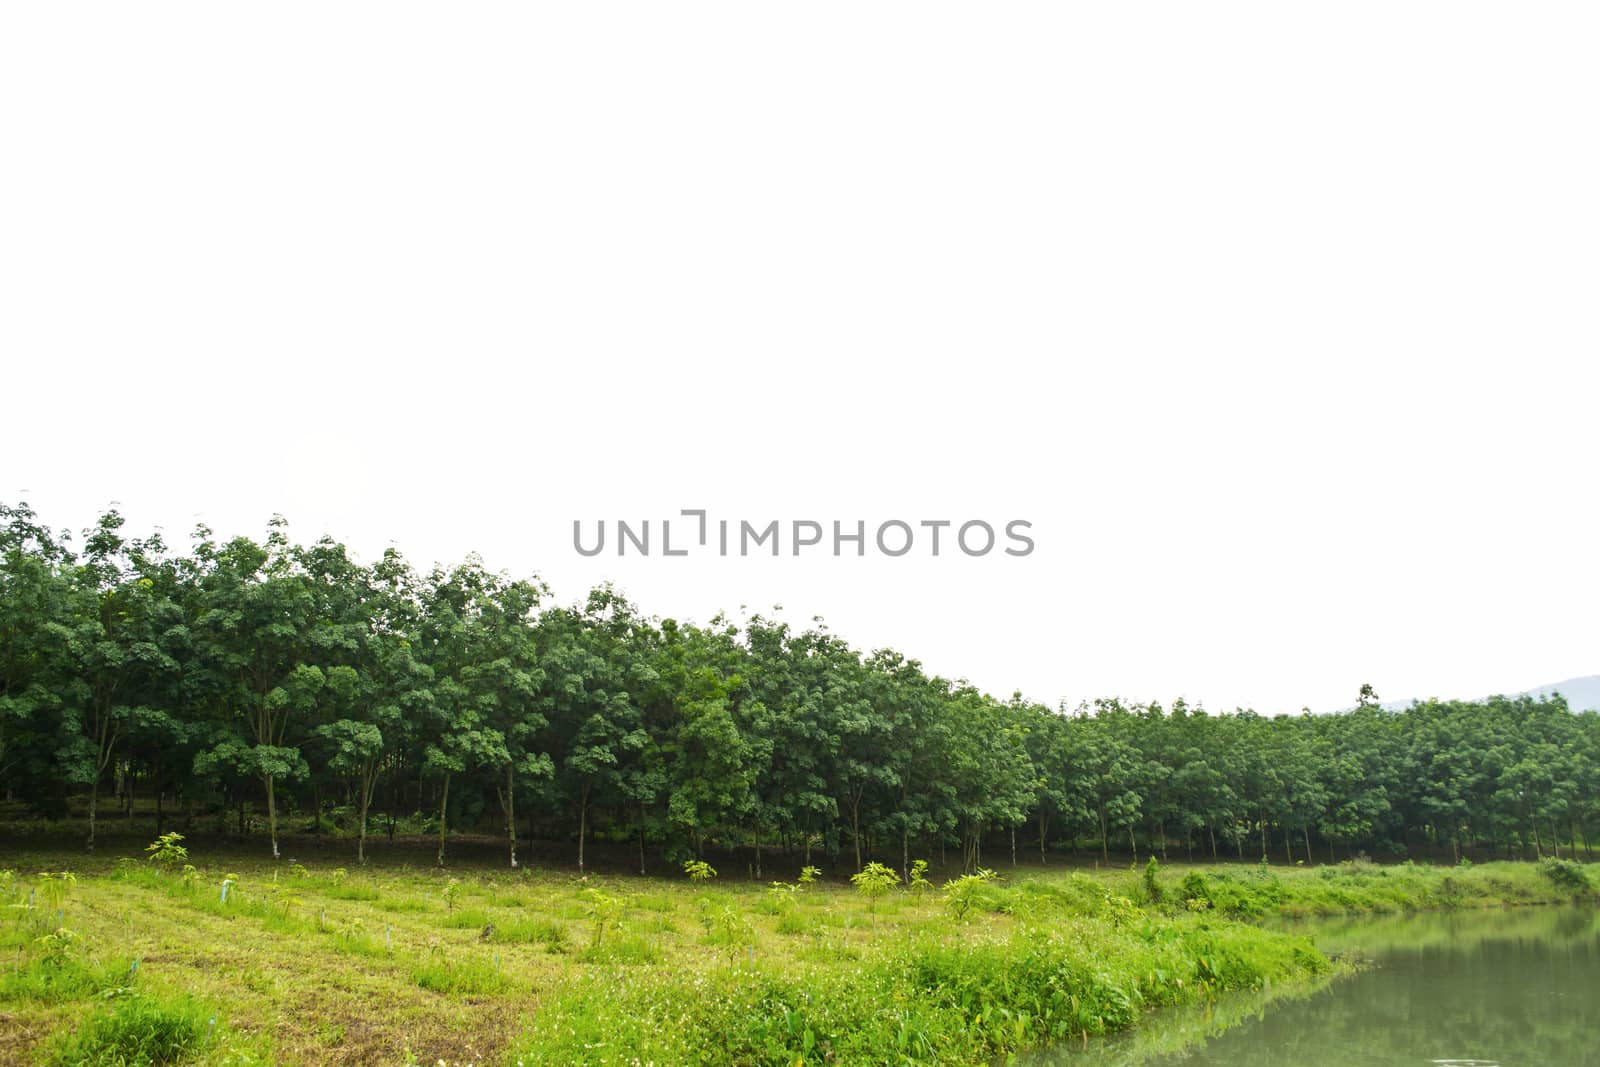 Rows of rubber trees in Thailand by Thanamat